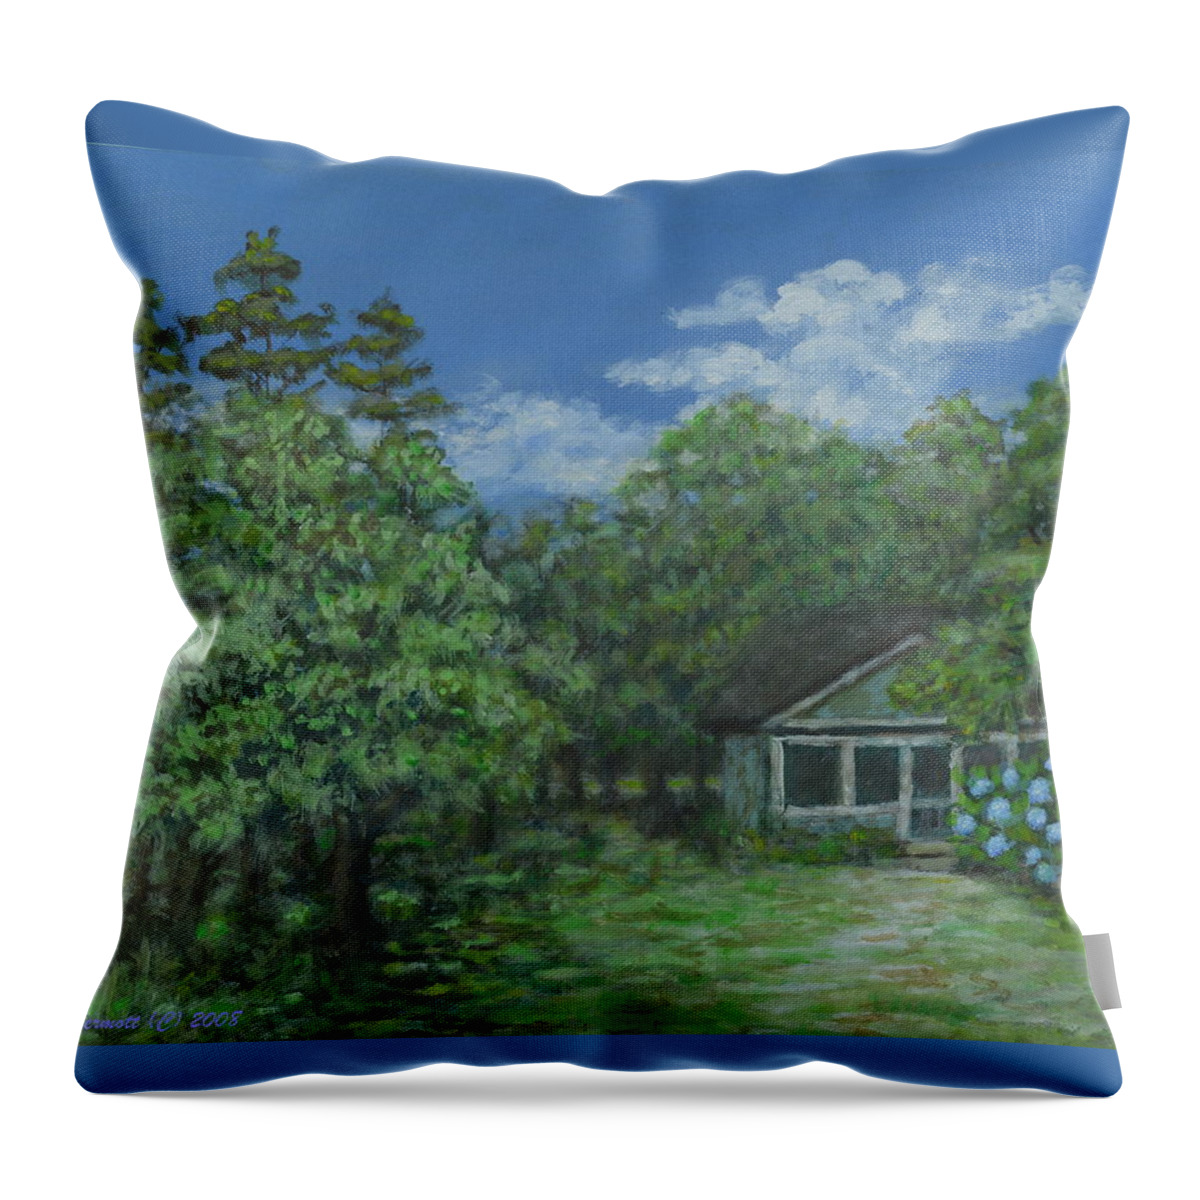 Blue Sky Throw Pillow featuring the painting Pawleys Island Blue by Kathleen McDermott